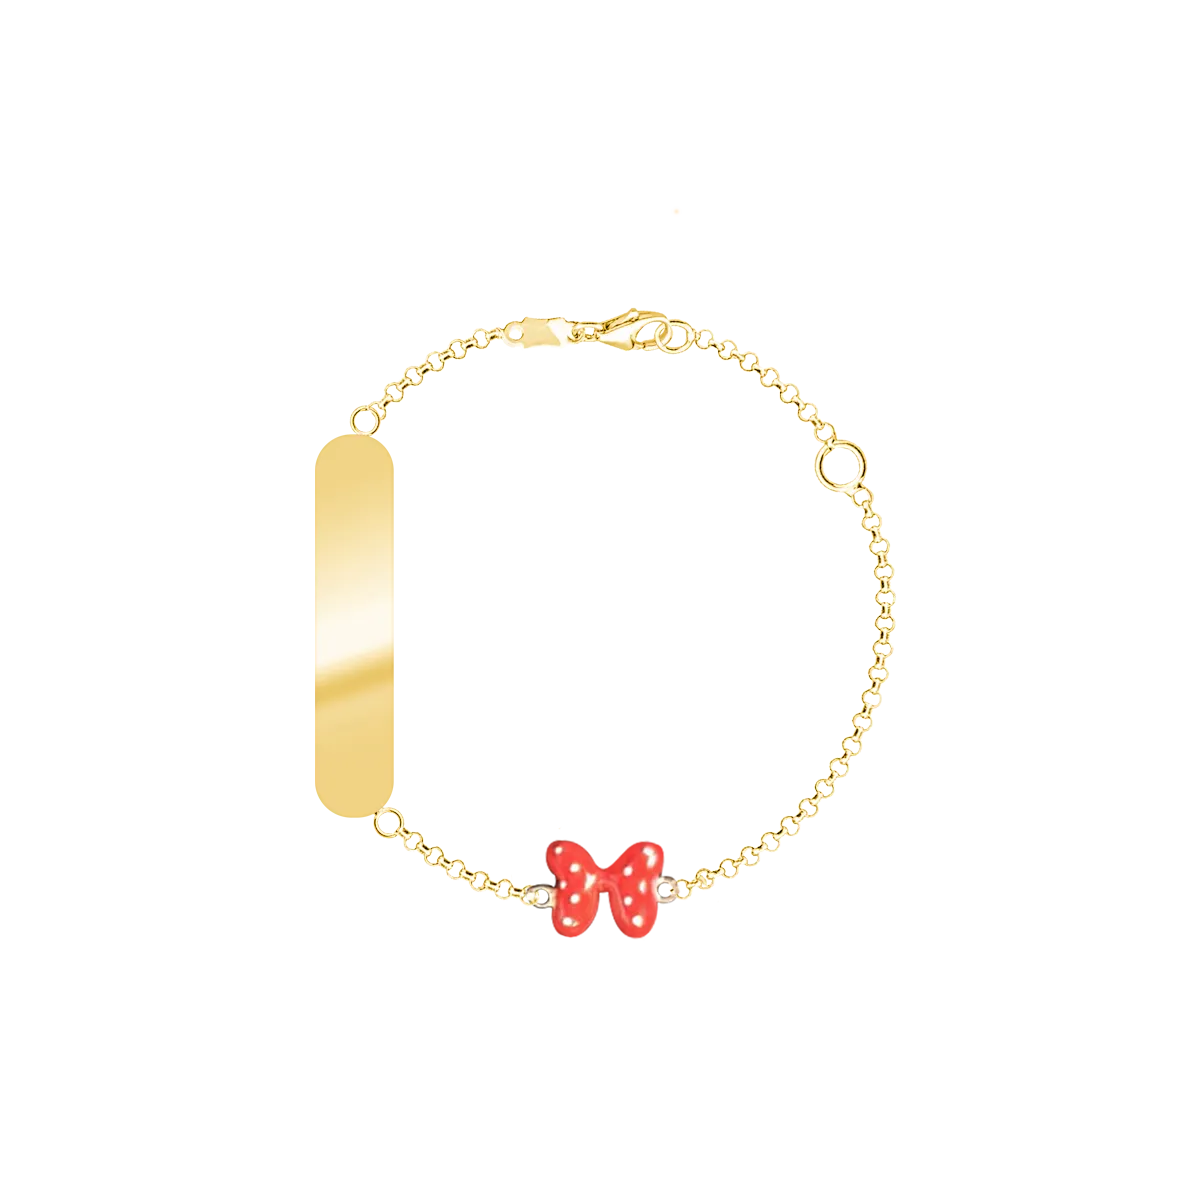 14K yellow children's bracelet with gold bow